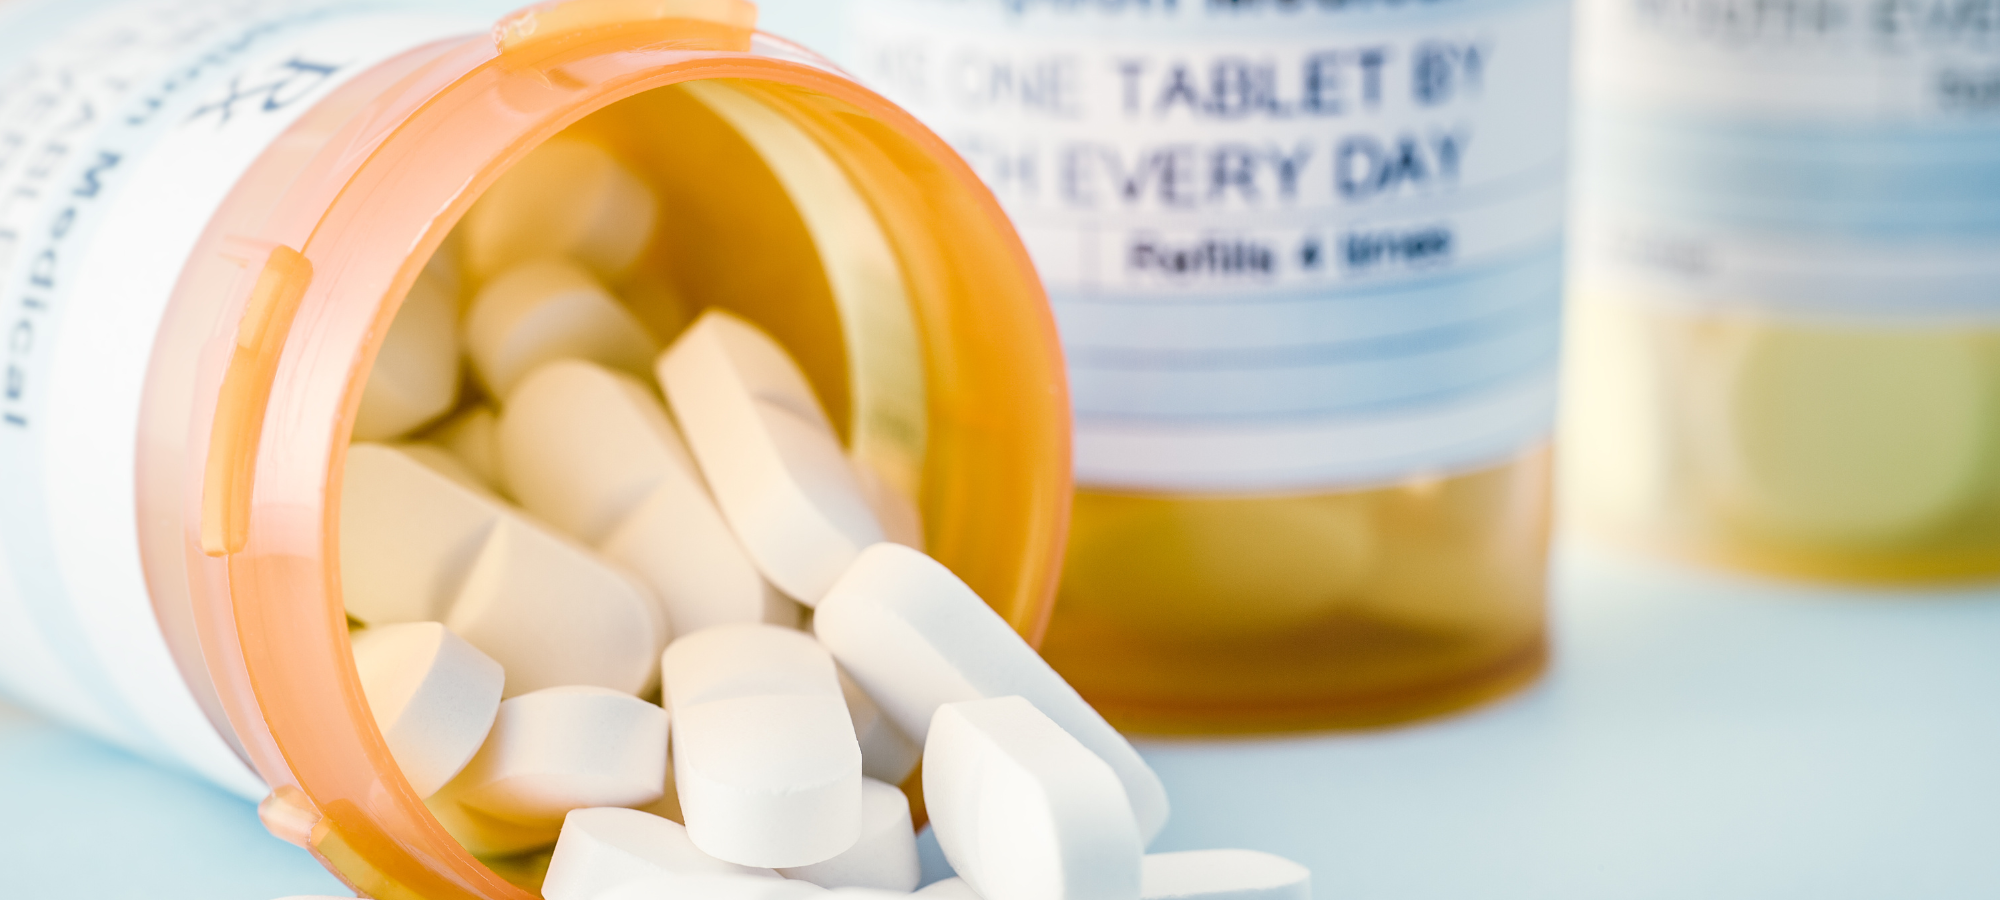 Returning unused medications to the pharmacy: What you need to know